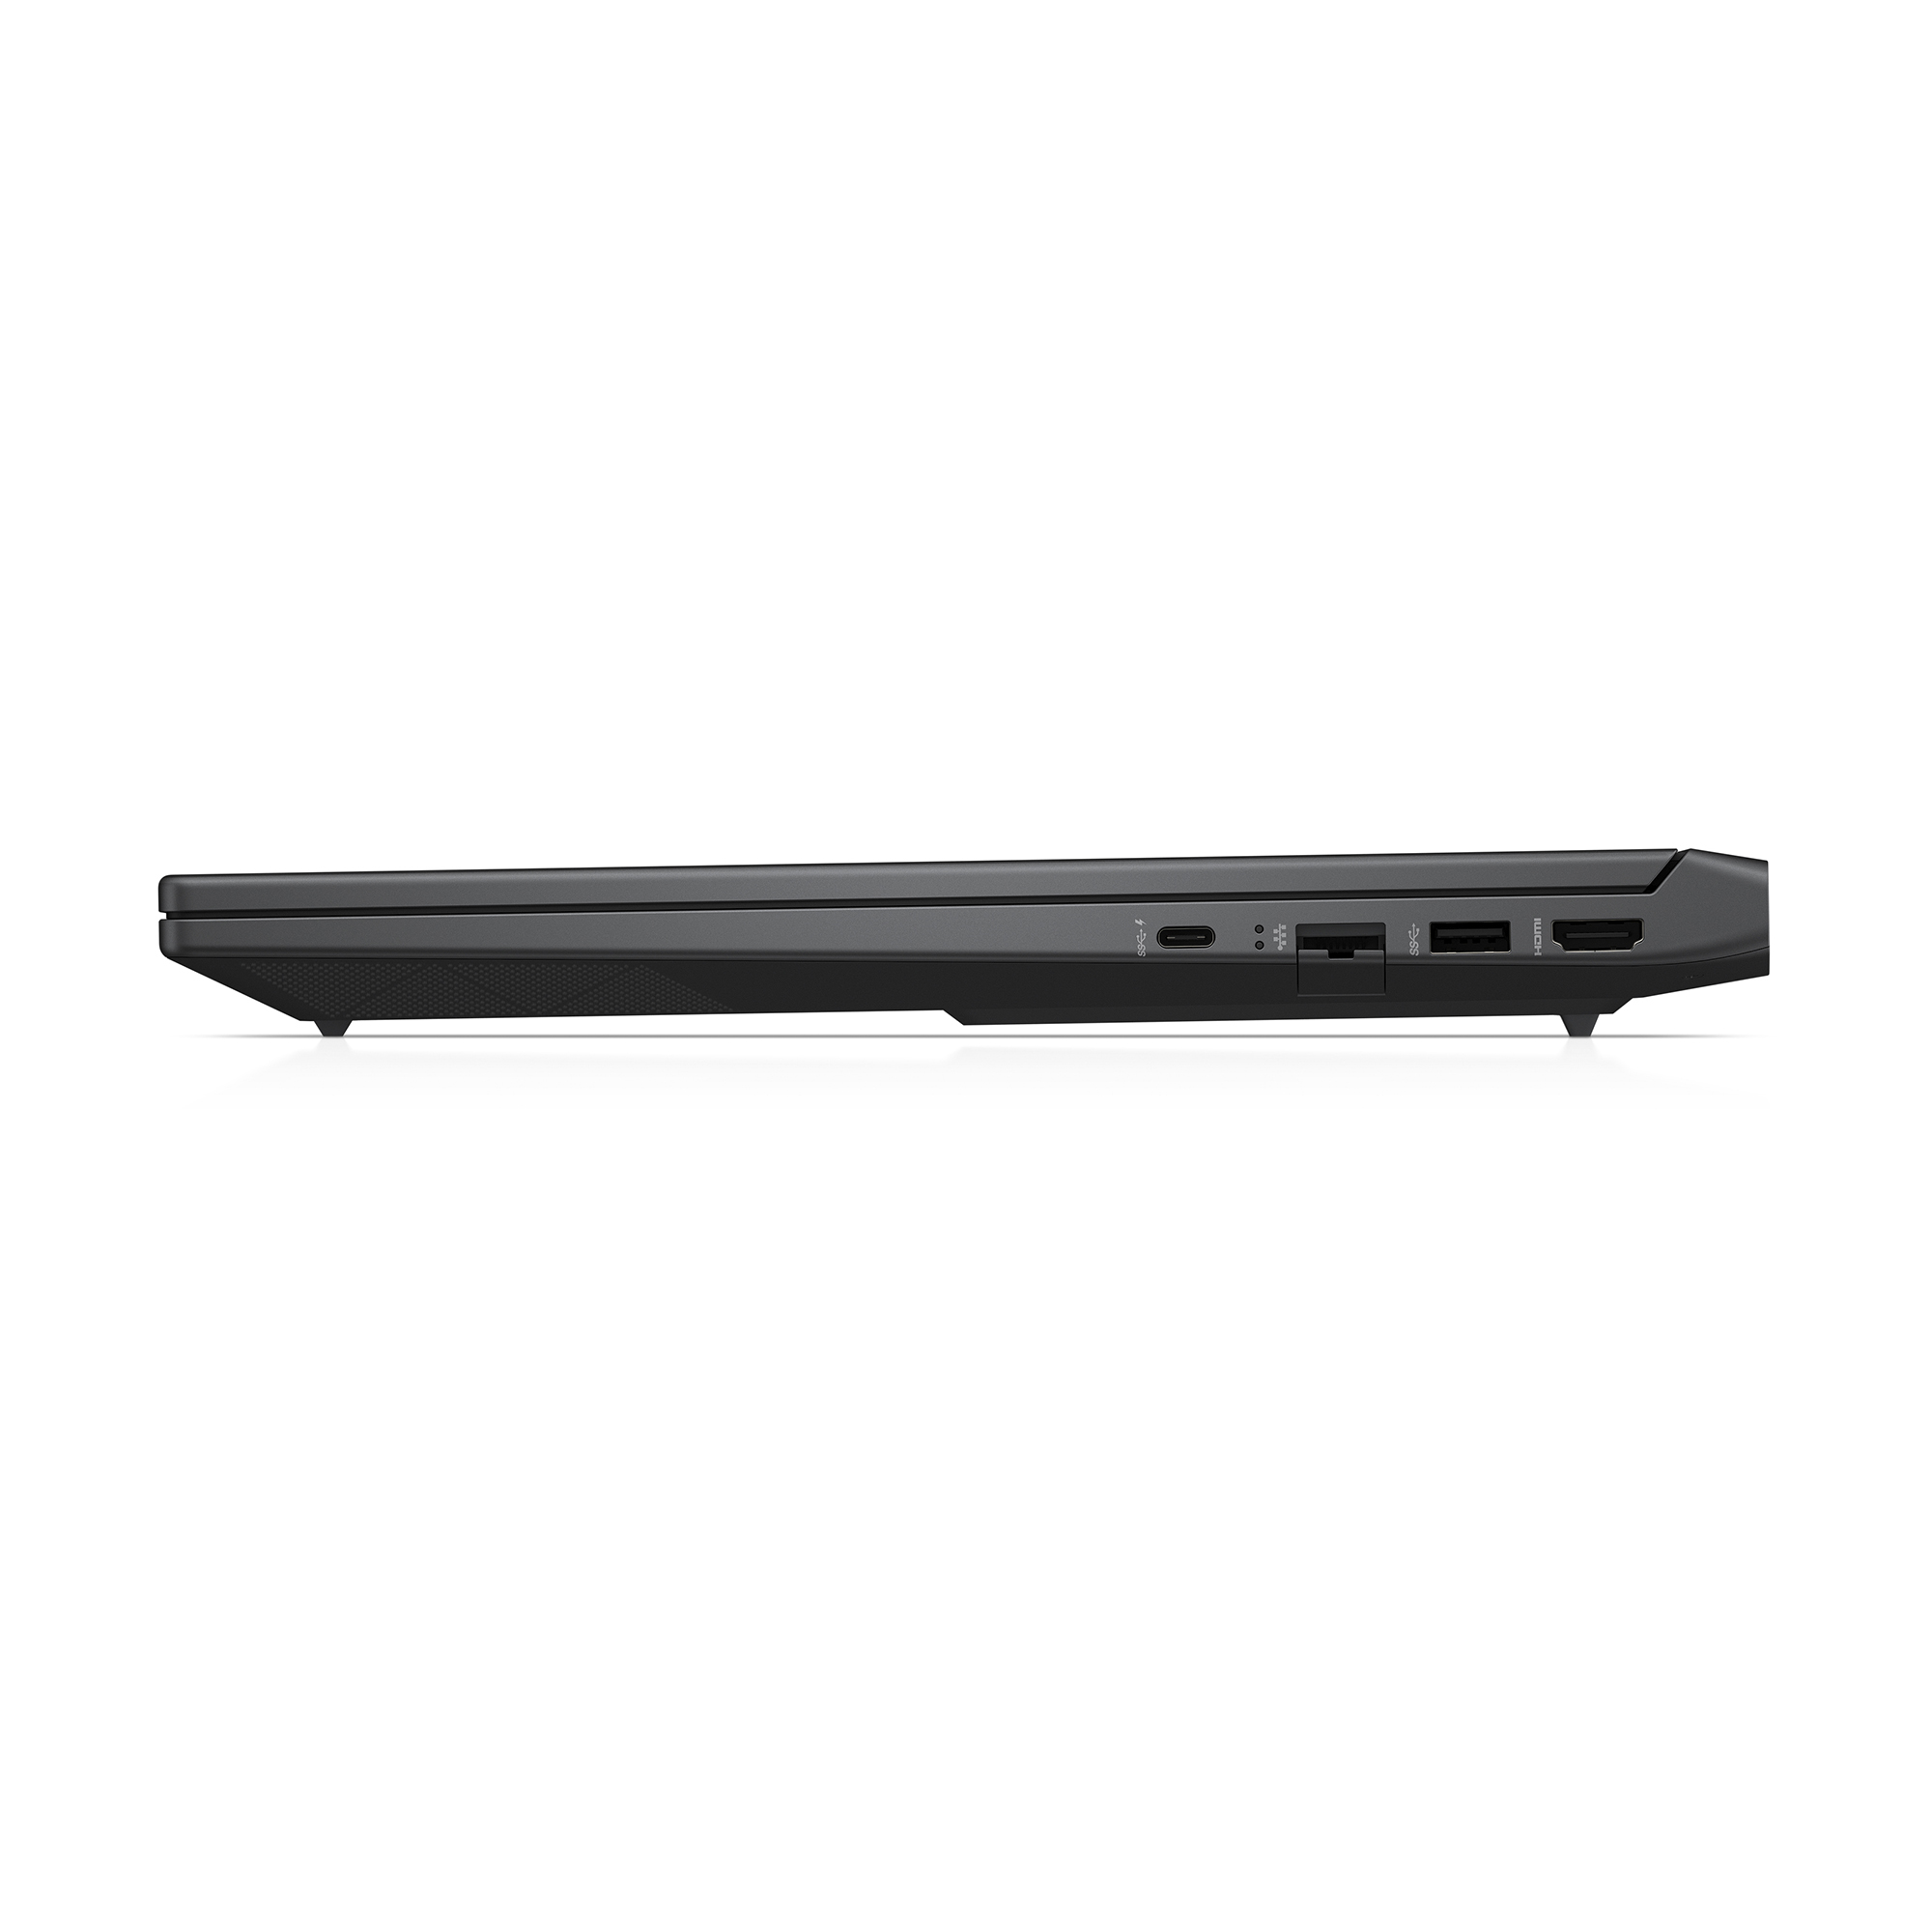 HP Victus 15 gaming laptop closed side profile.